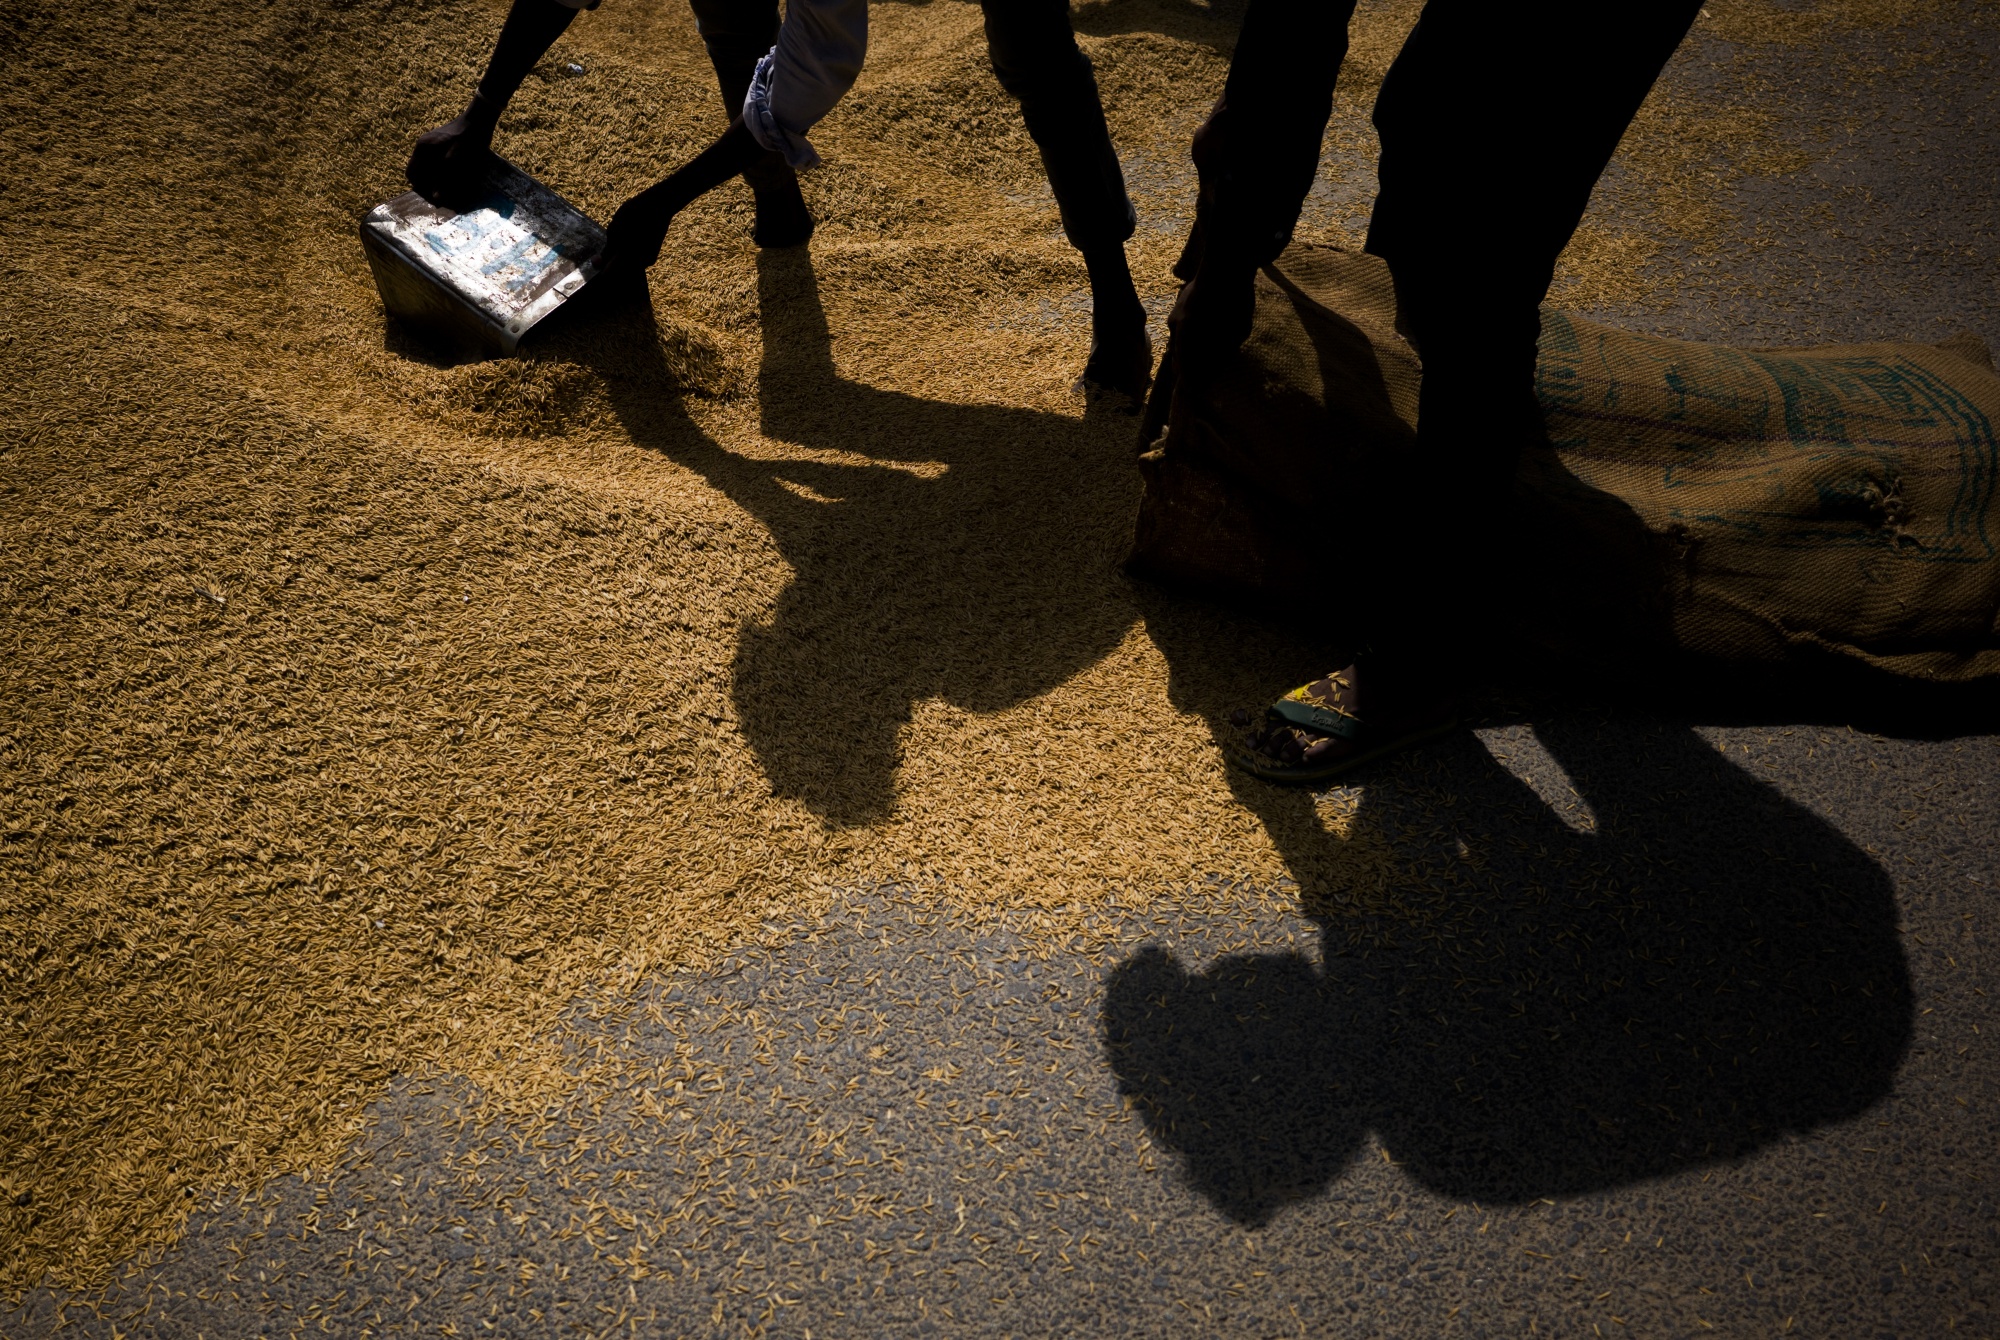 Workers bag rice paddy at a wholesale market in New Delhi, India.